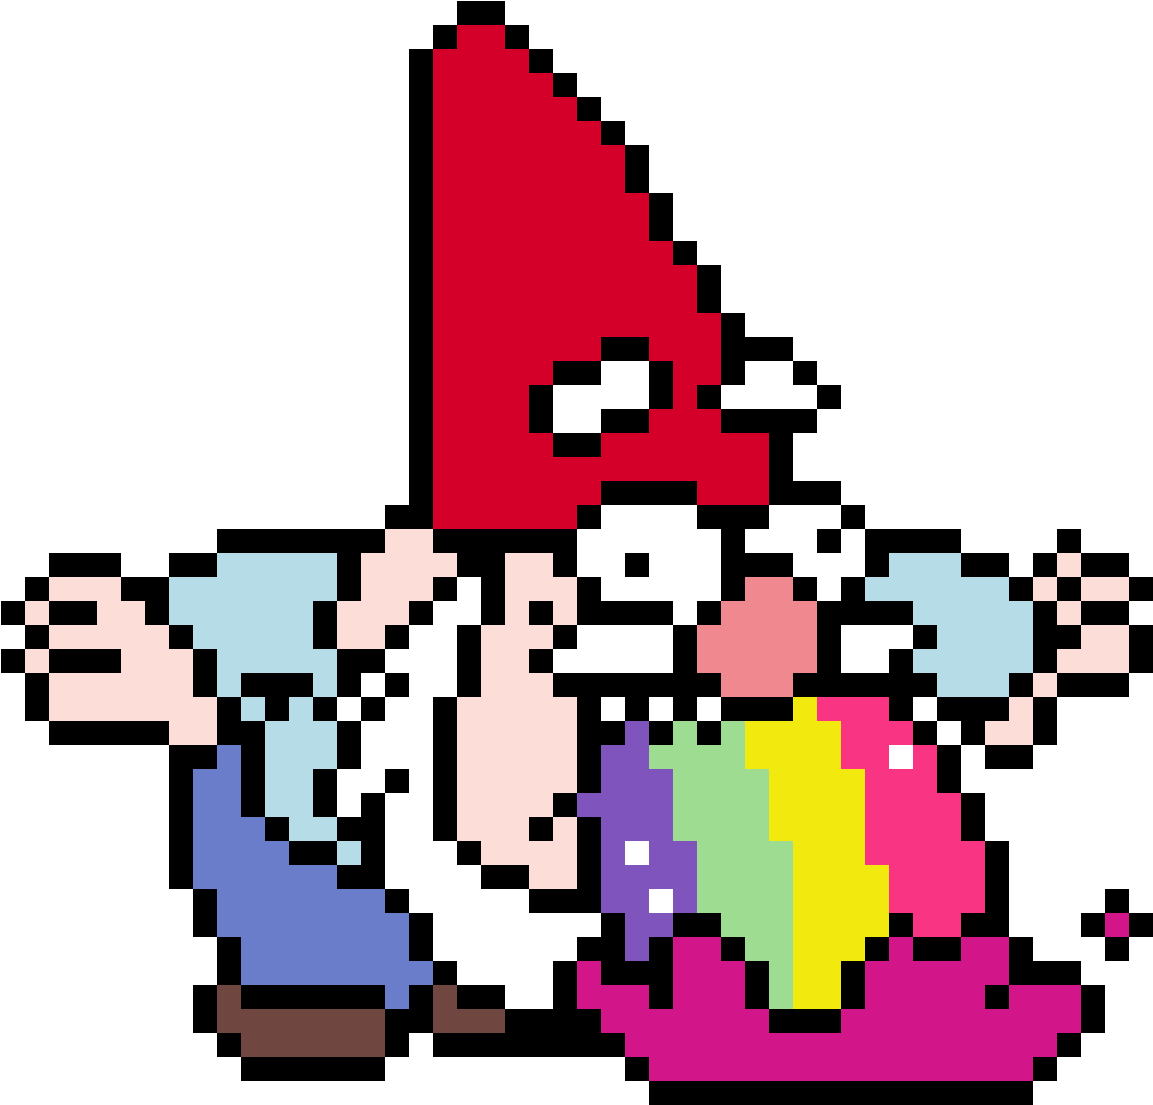 Throwing Up Gnome From Gravity Falls - Pixel Art Gravity Falls (1200x1152)